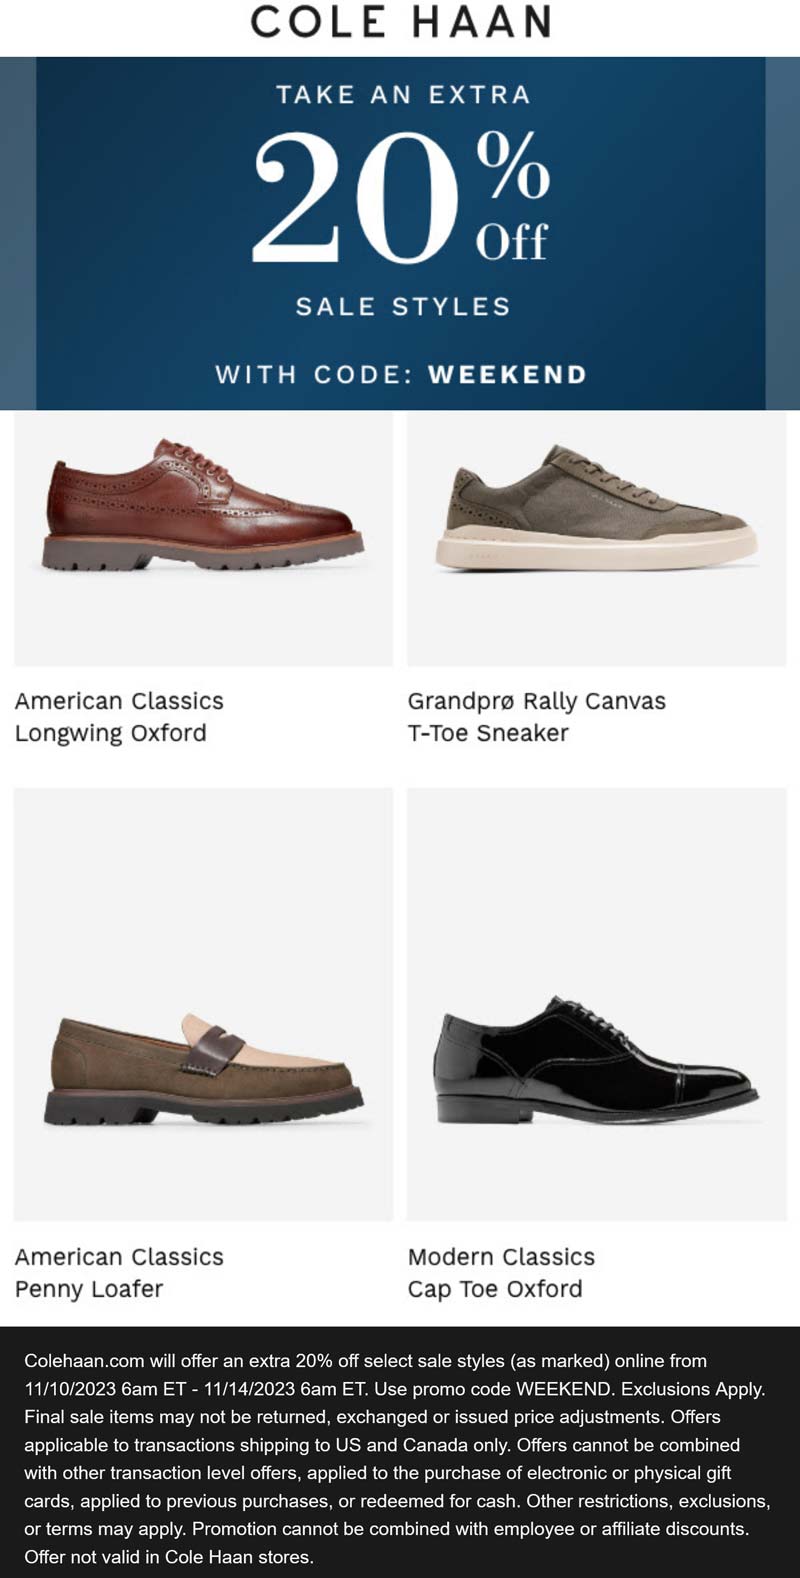 Cole Haan stores Coupon  Extra 20% off sale styles today at Cole Haan via promo code WEEKEND #colehaan 